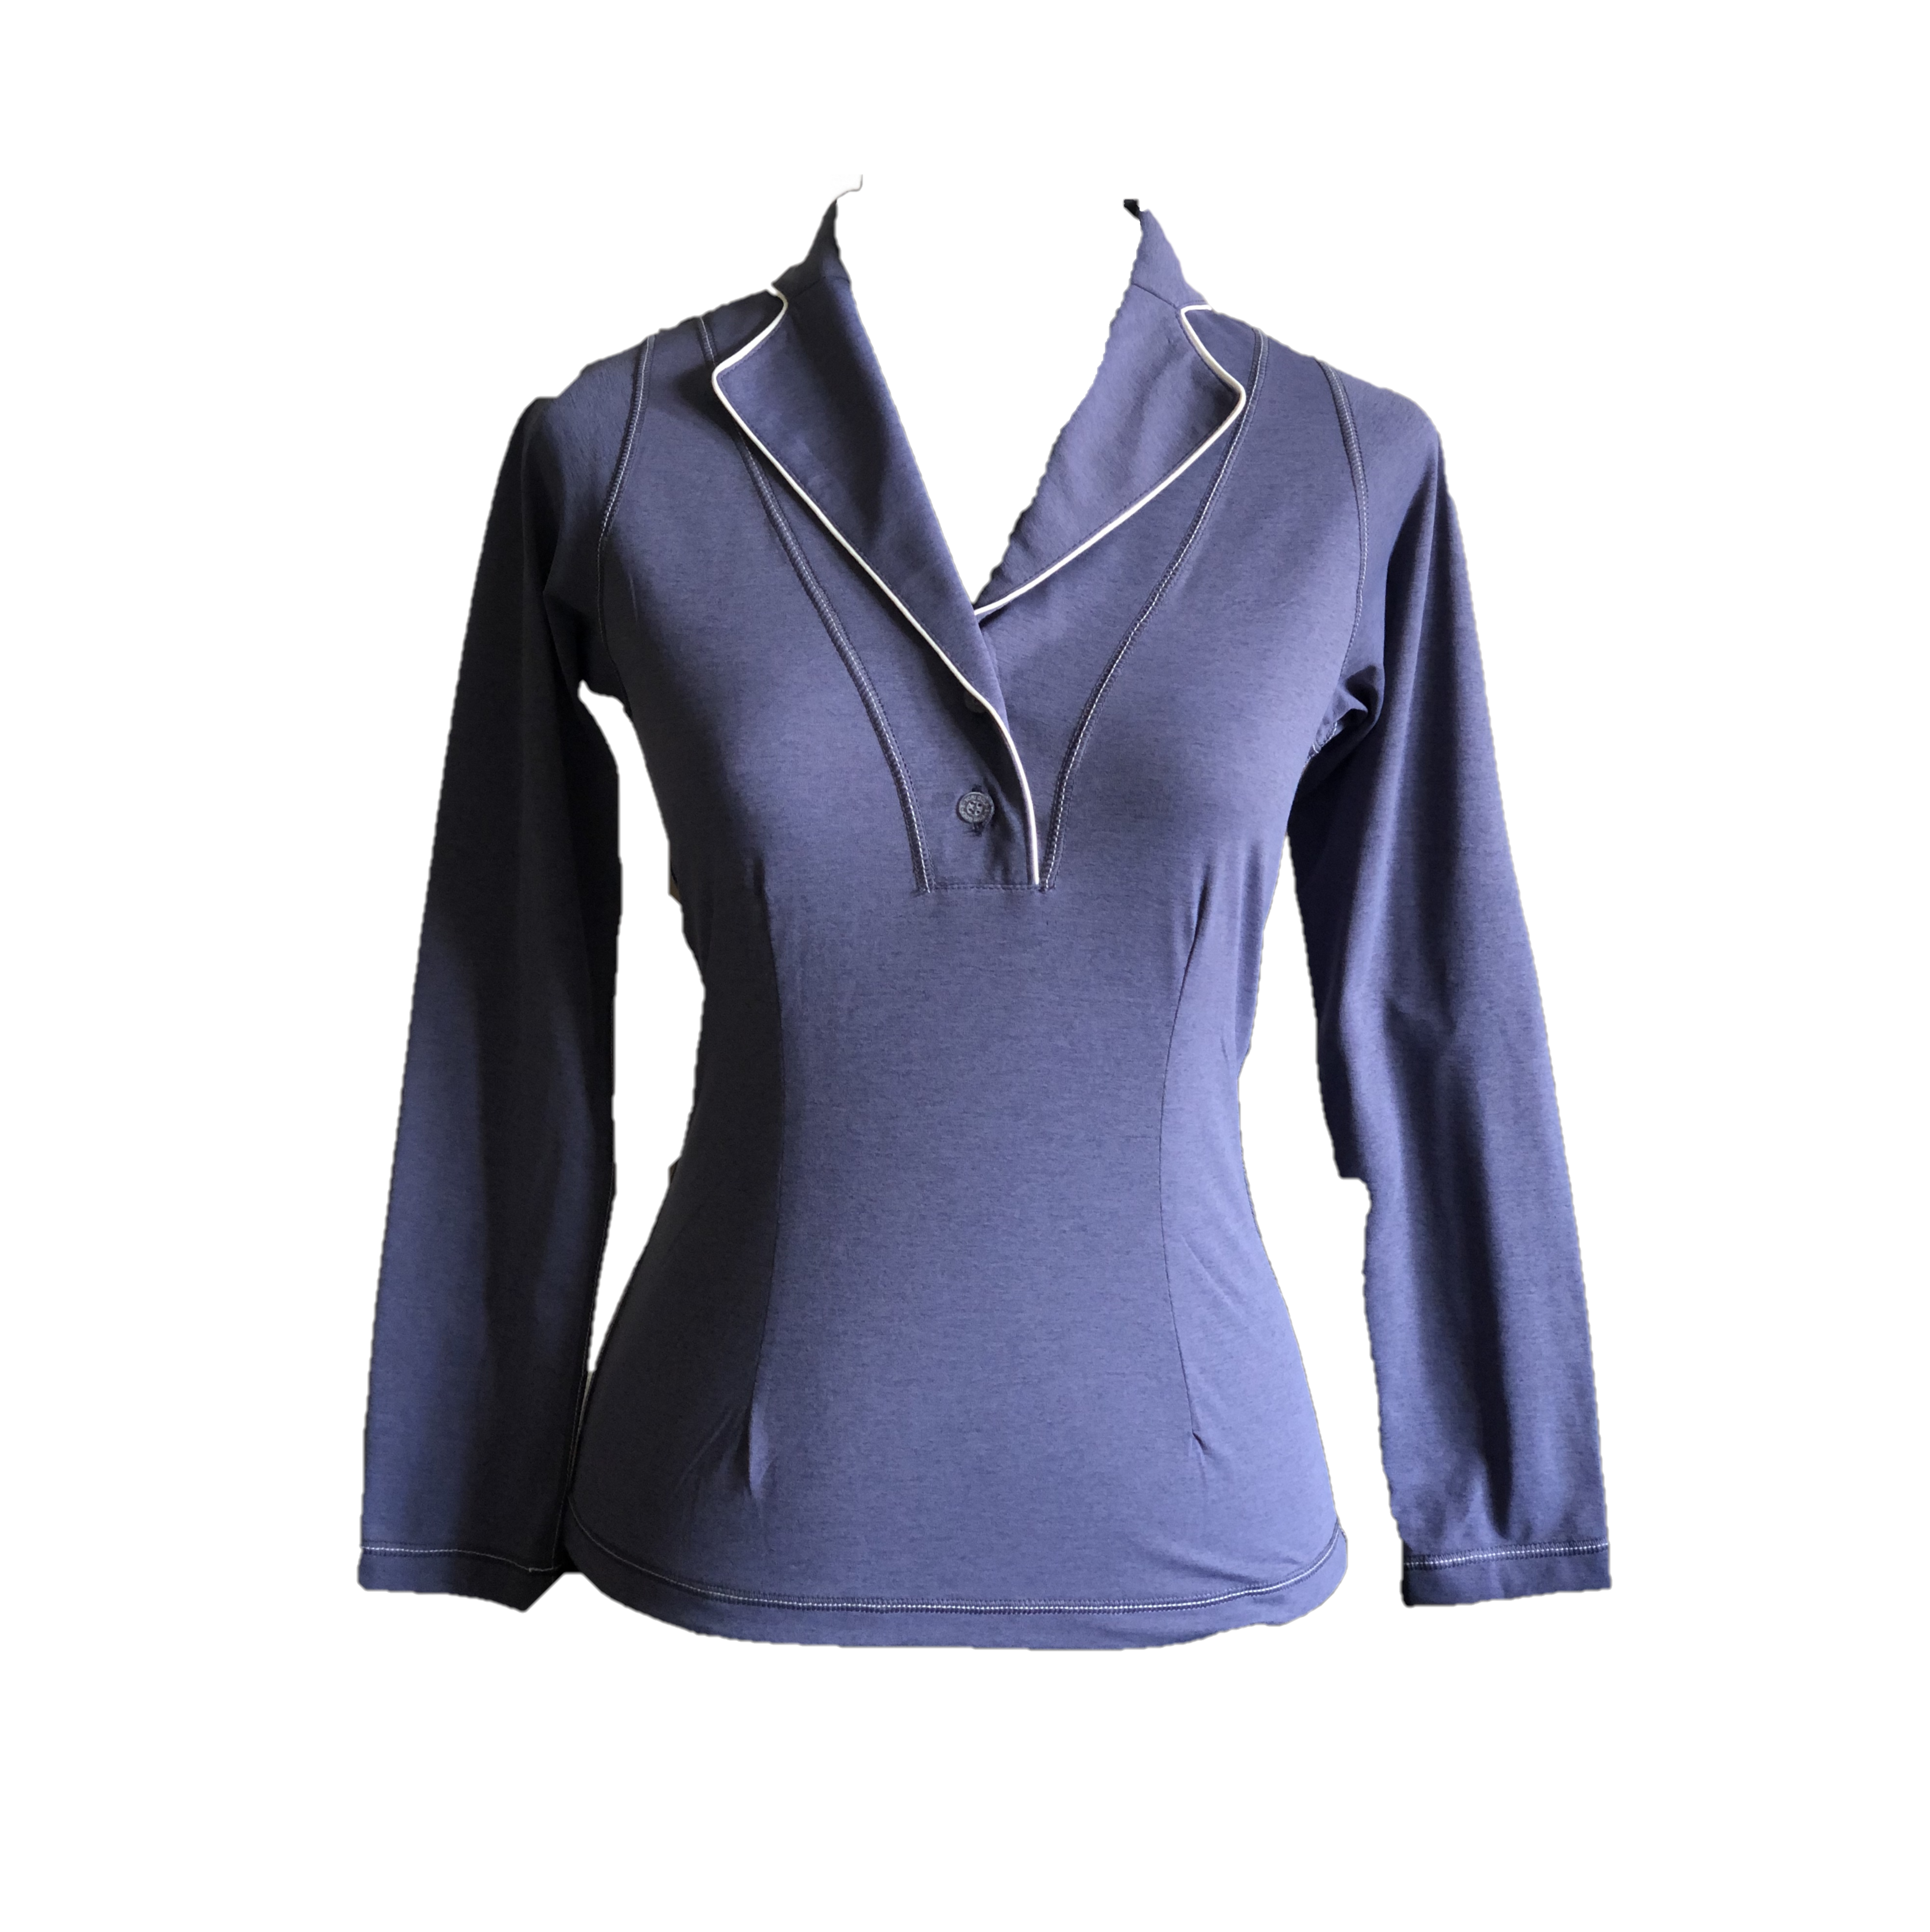 LT-110A || Ladies Top Smoke Blue Long Sleeve Shawl Neck 2 Buttons with White Piping